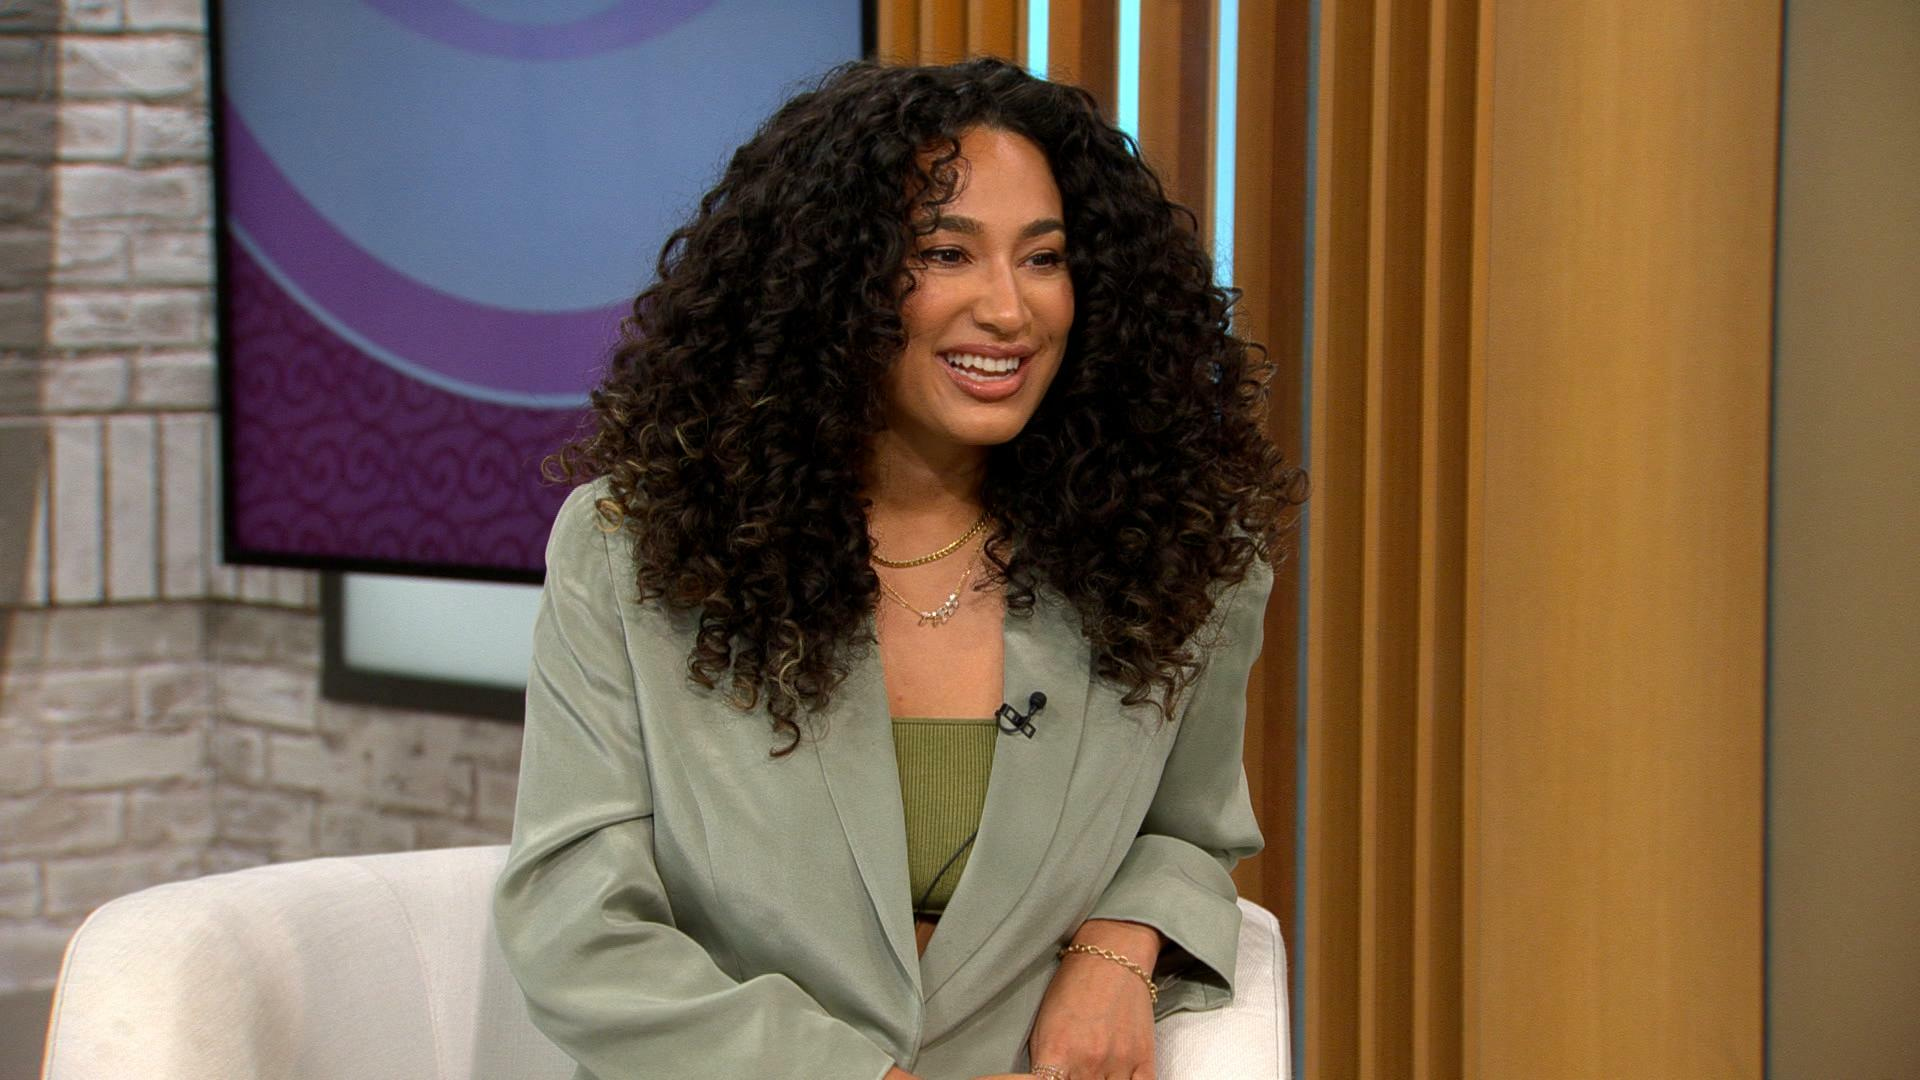 Watch CBS Mornings: Redefining beauty standards for curly hair - Full show  on CBS